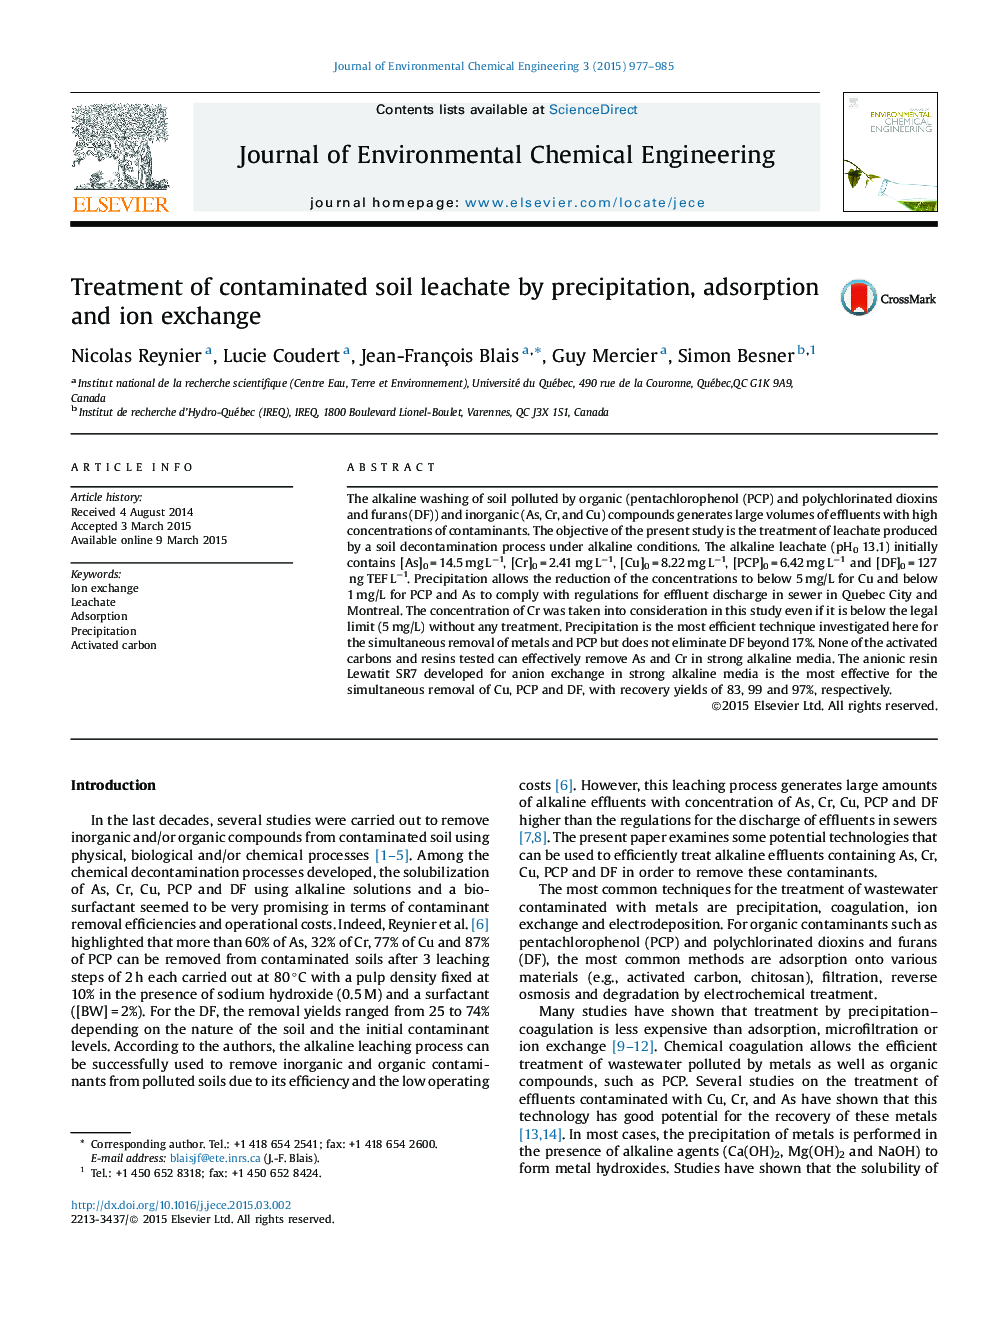 Treatment of contaminated soil leachate by precipitation, adsorption and ion exchange